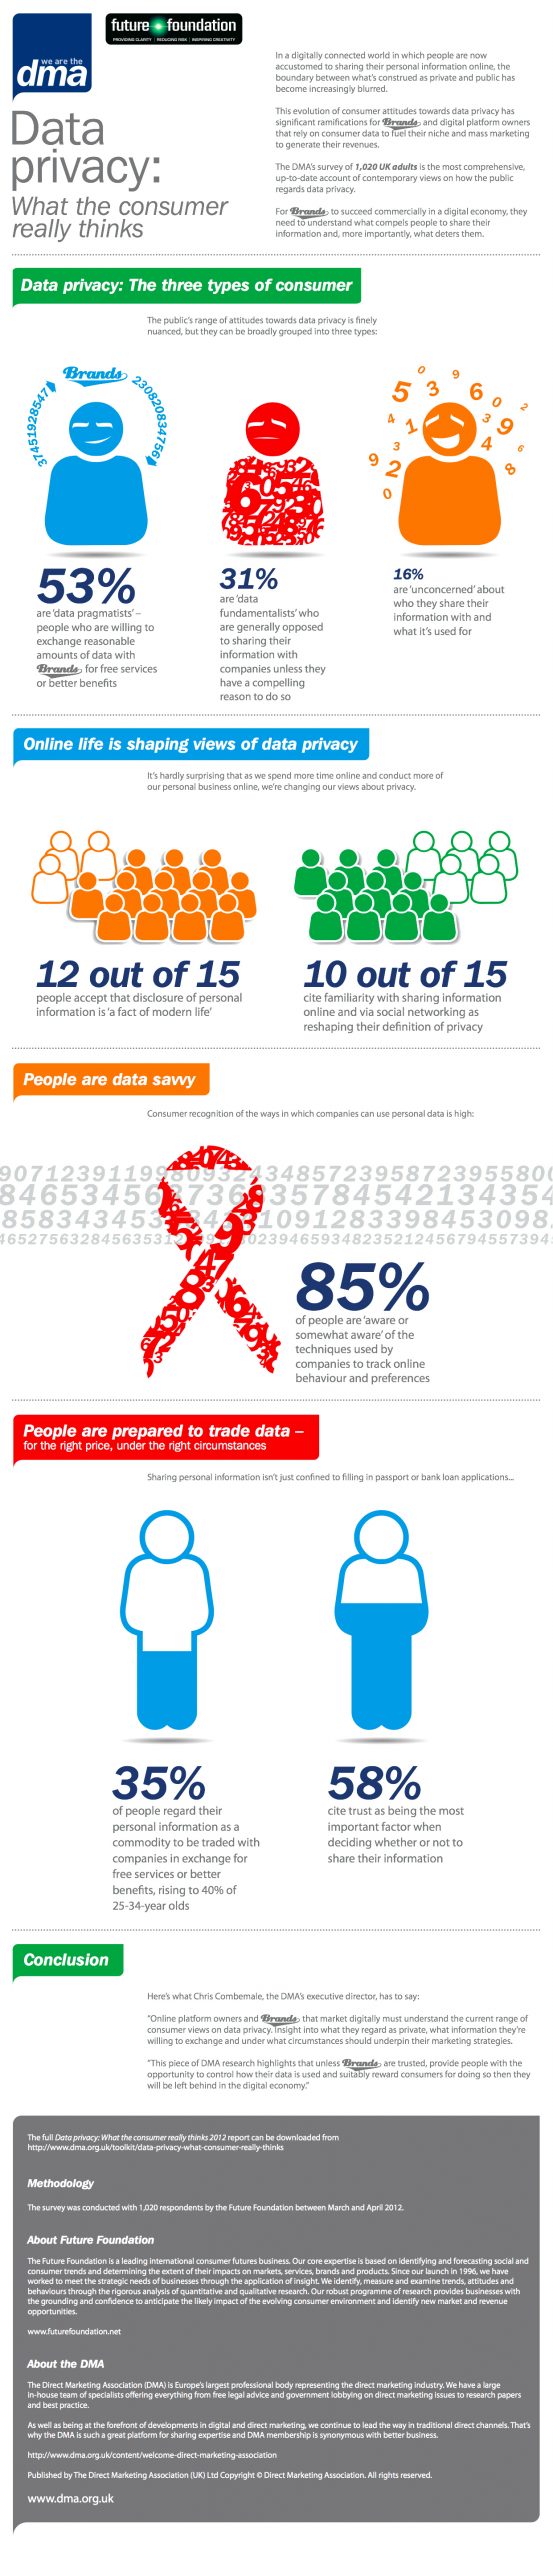 What The Consumer Really Thinks Of Data Privacy - Infographic